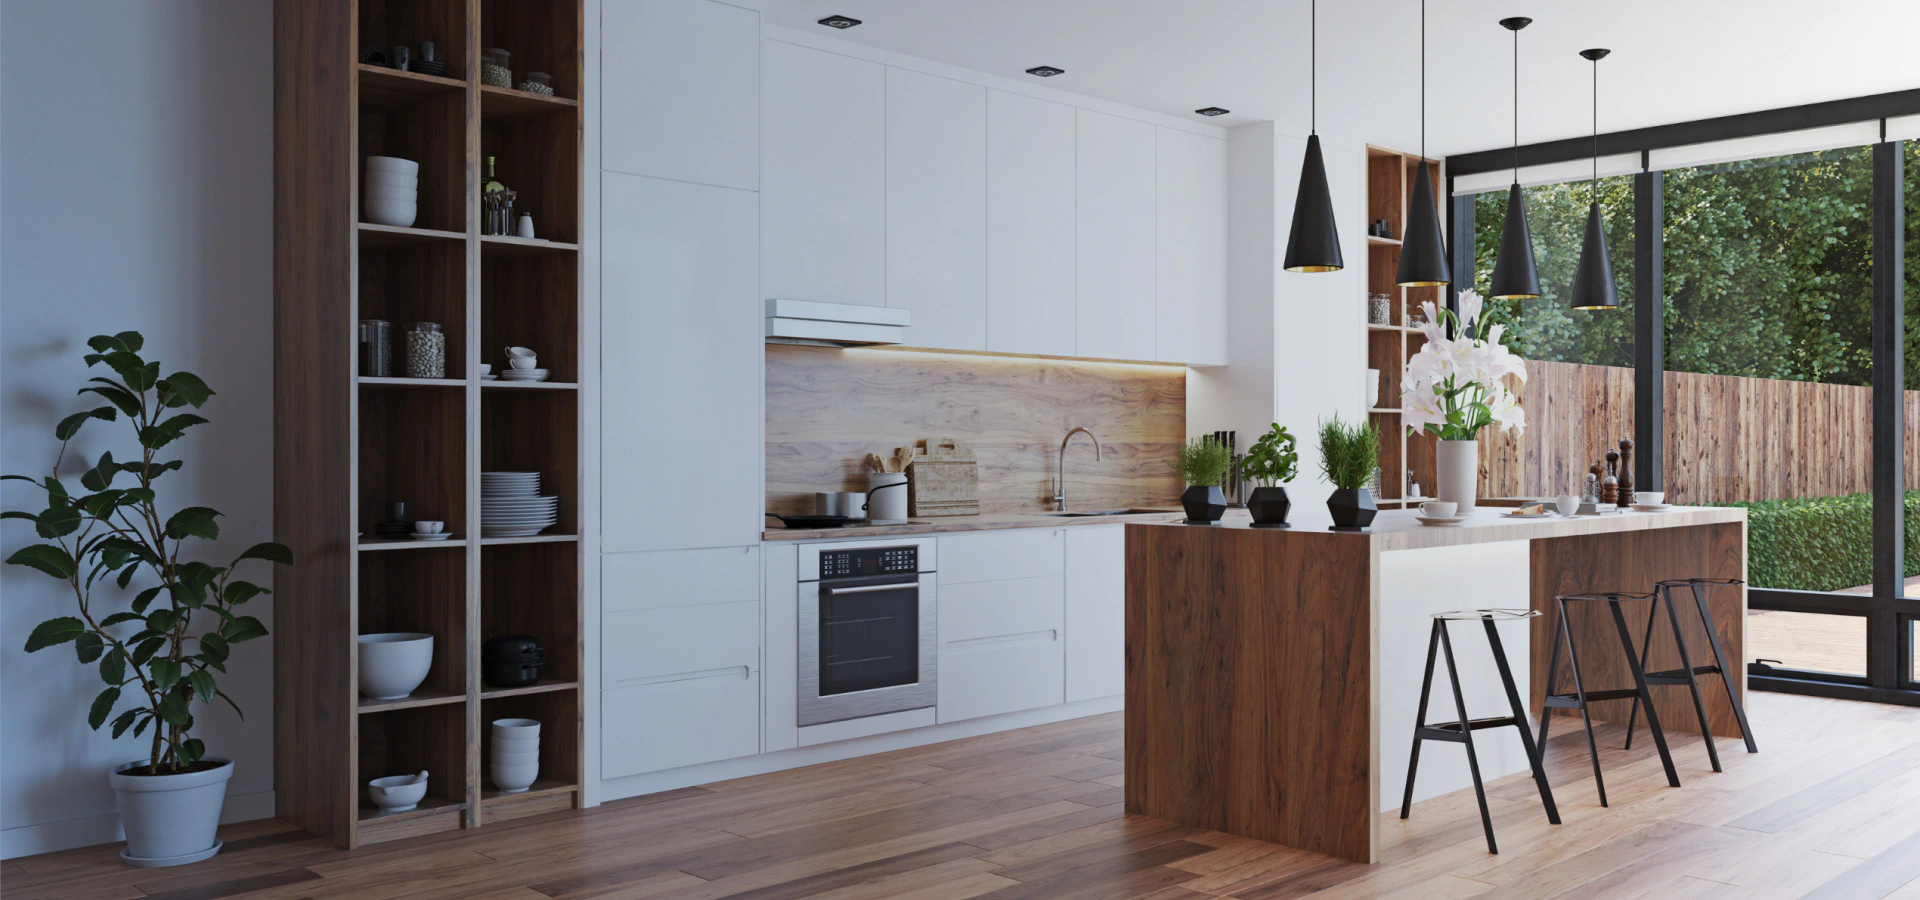 modern minimal kitchen with wooden cabinets and flooring